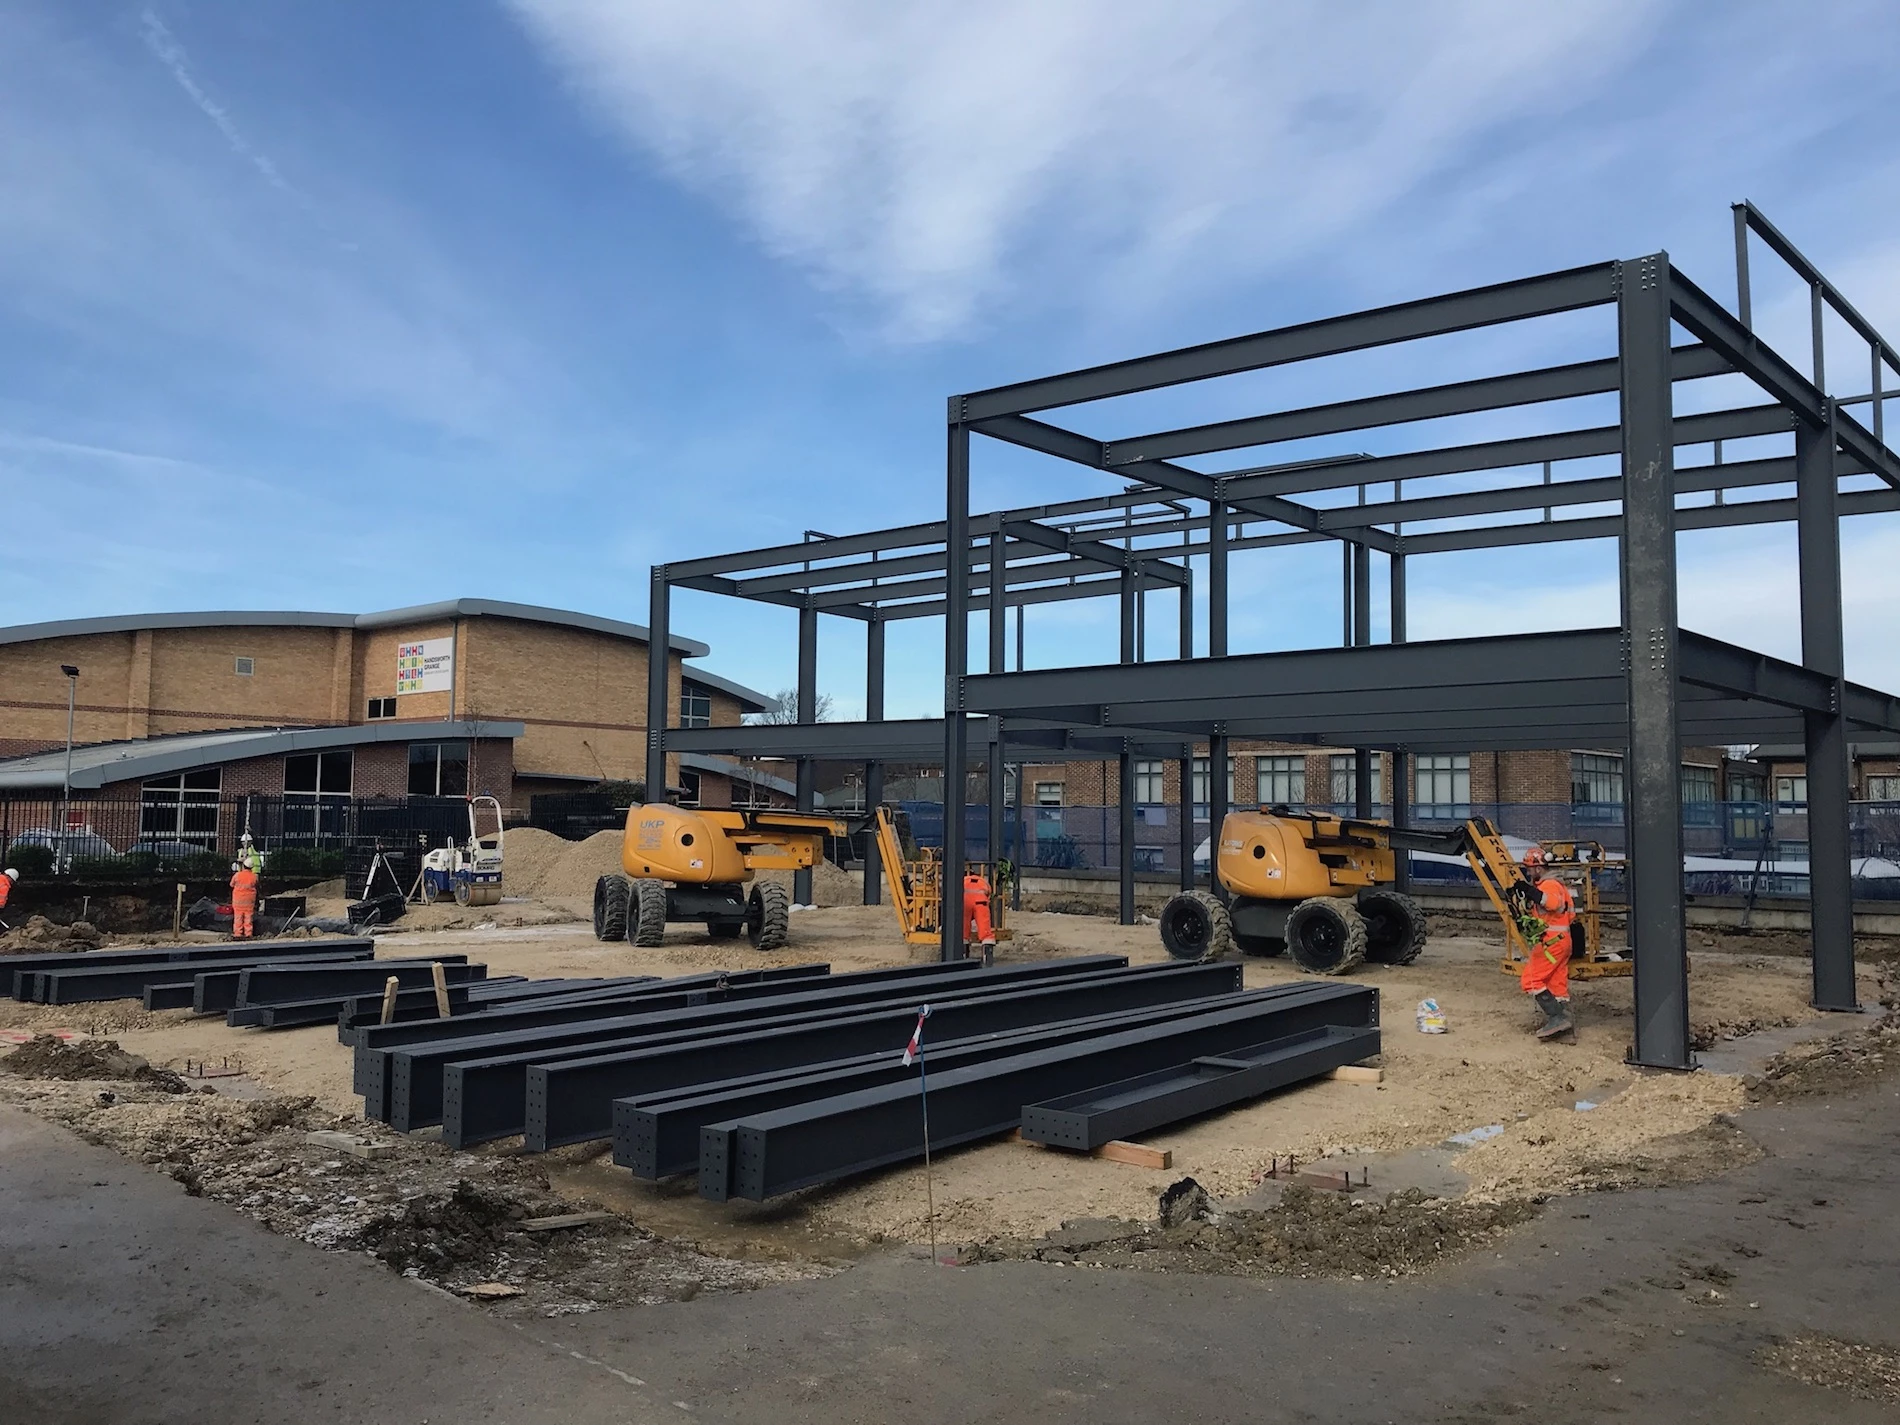 Construction of the steel frames and the progress of the new teaching block.